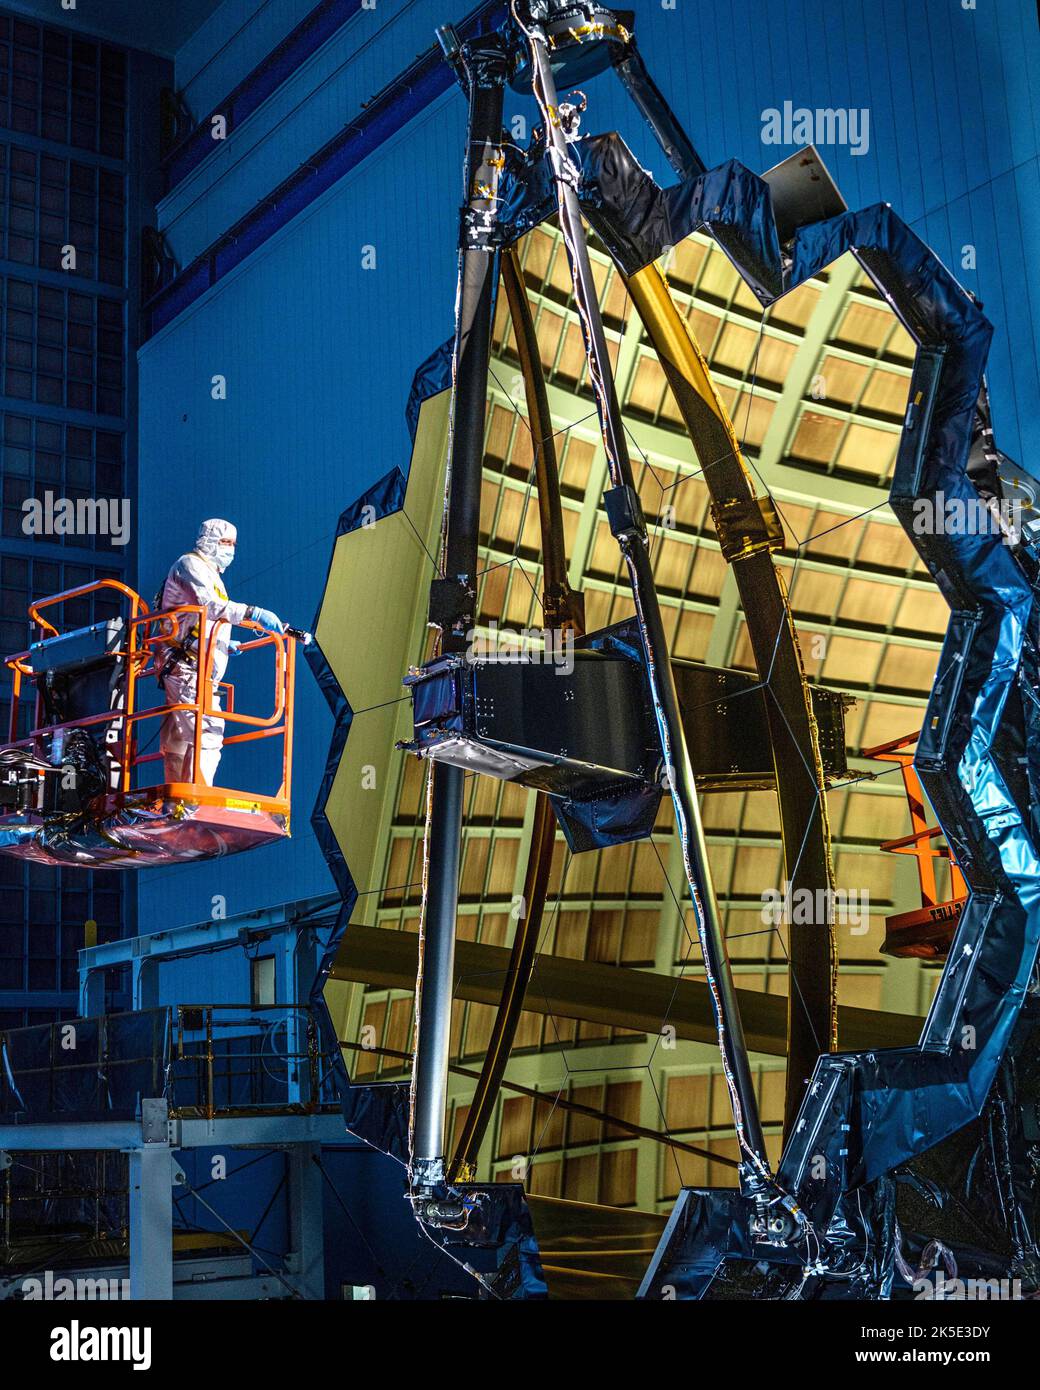 Preparing the James Webb Space Telescope (JWST). This image was captured after the successful 'center of curvature' testing operations. The technician with the flashlight is George Mooney.  An optimised version of a NASA image by experienced lead photographer Chris Gunn. Credit: NASA/Chris Gunn. For editorial use only. Stock Photo